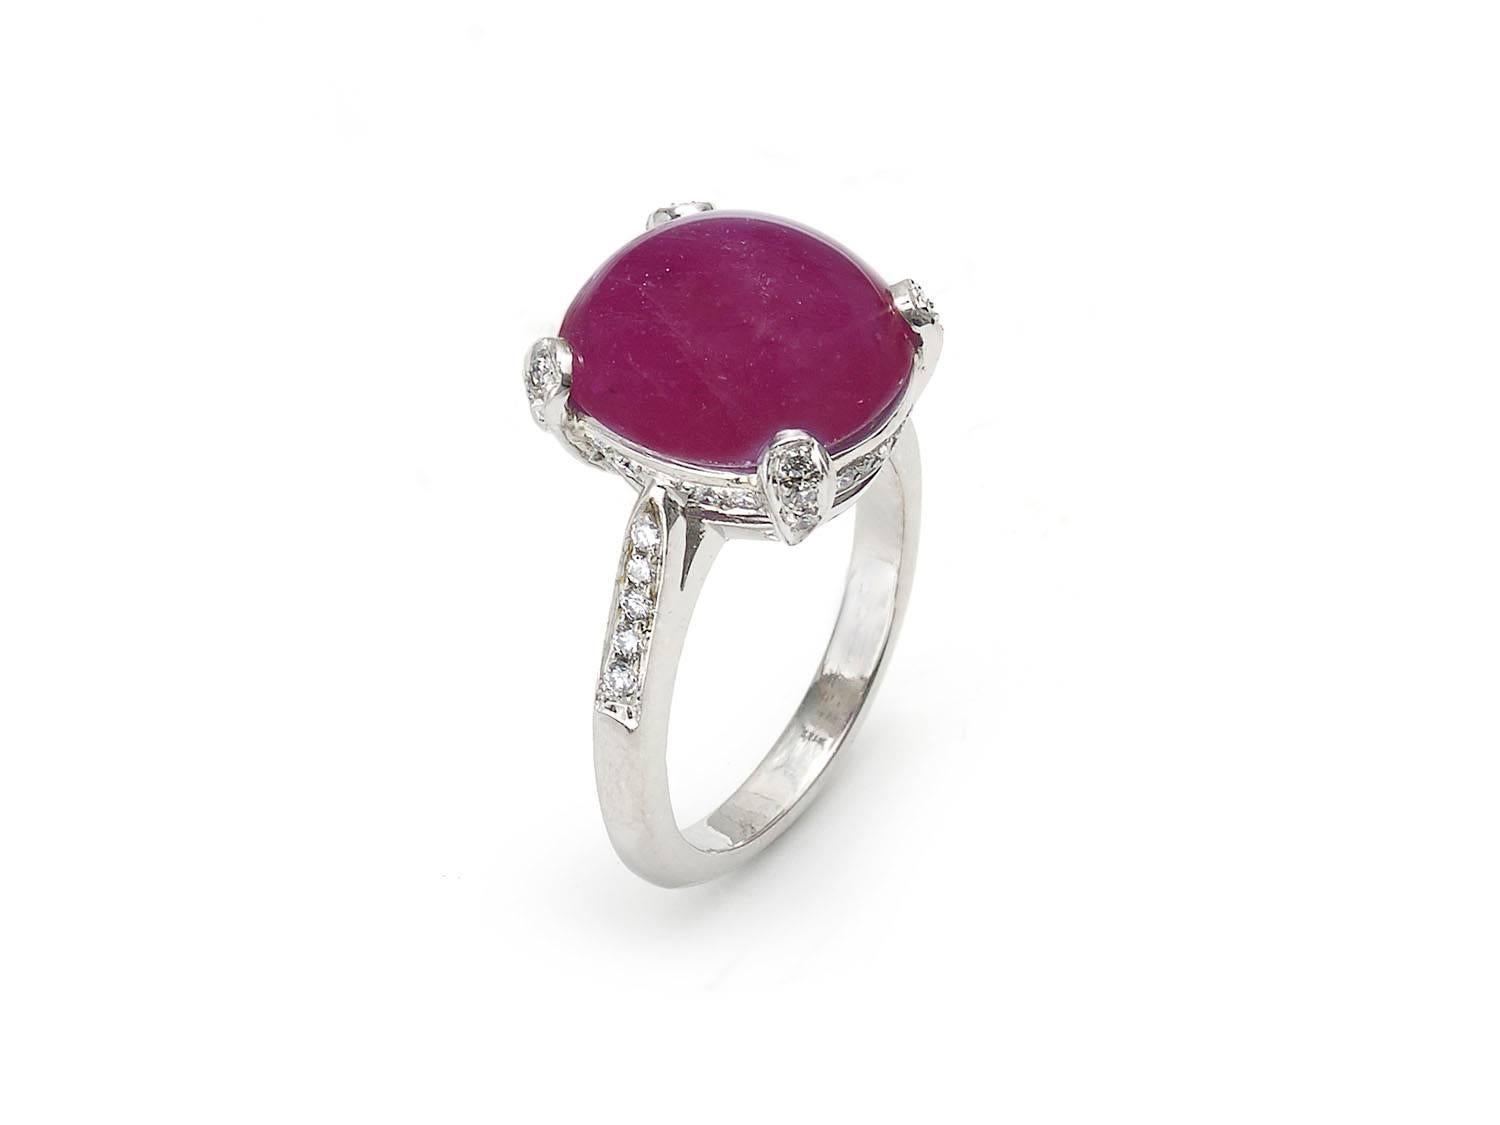 A ruby and diamond ring, set with a semi translucent, oval cabochon-cut ruby weighing an estimated 8.60ct, in a four claw setting, with brilliant-cut diamond set shoulders, claws and bezel. Finger size UK K½, US 5½